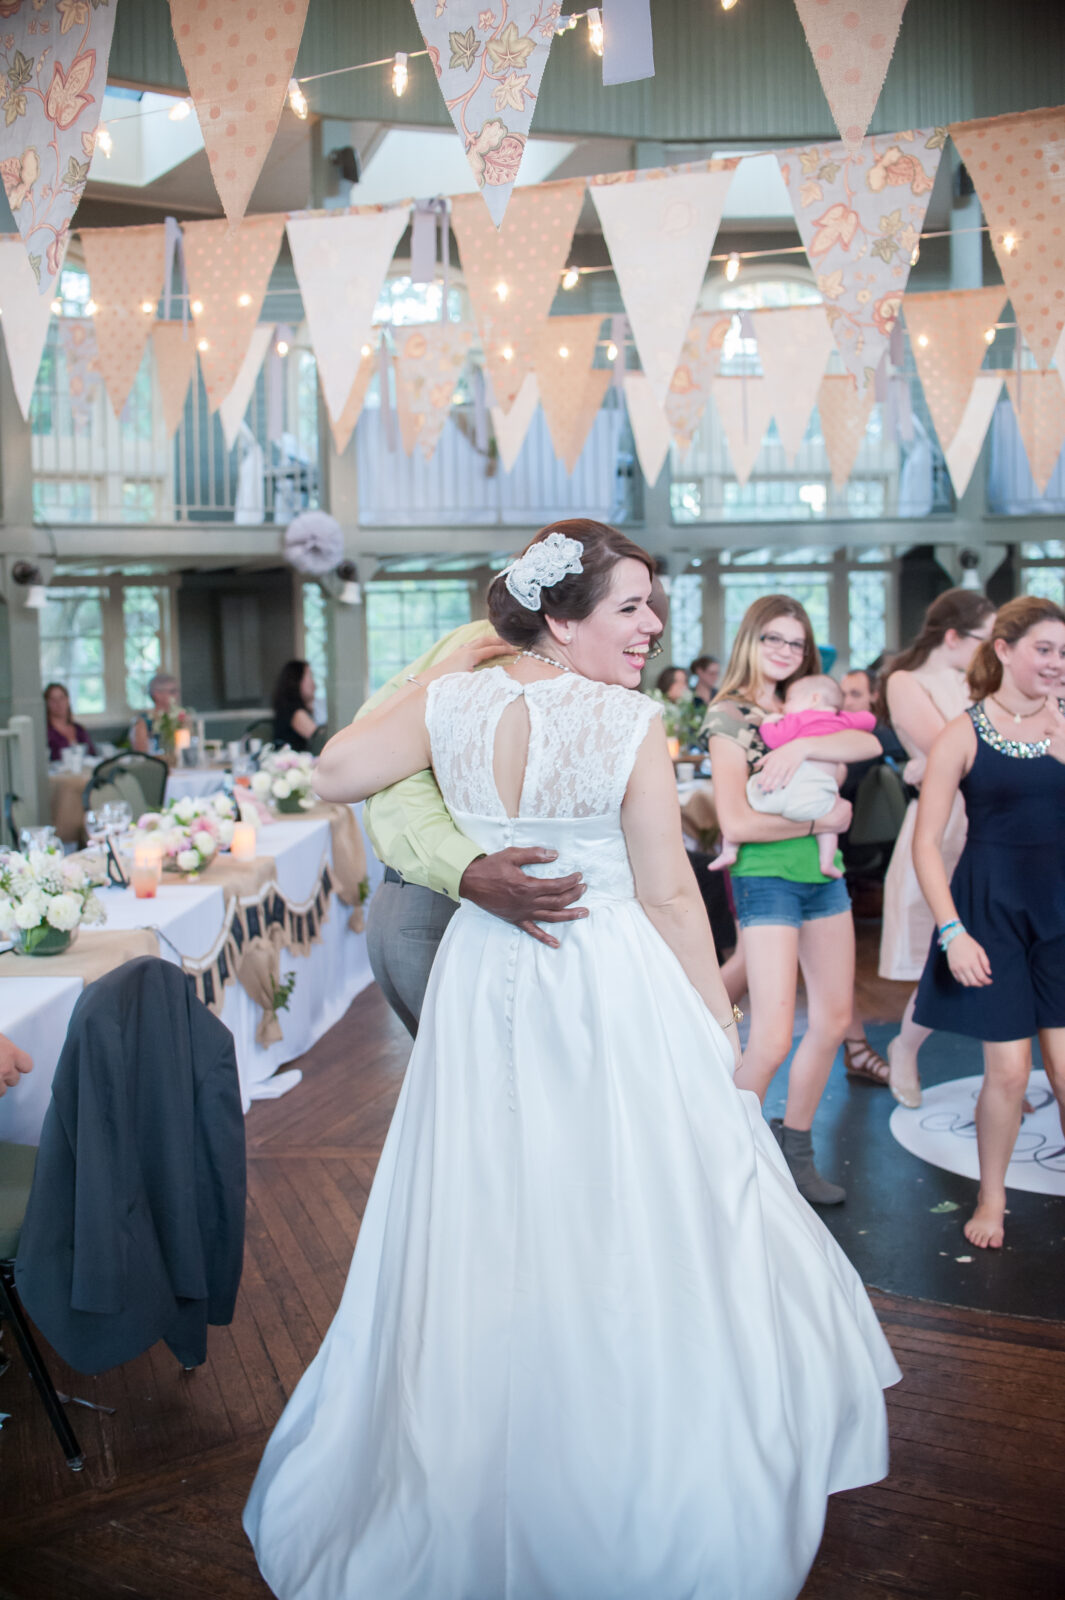 Bride laughing on the dance floor at wedding venue wilmington nc 